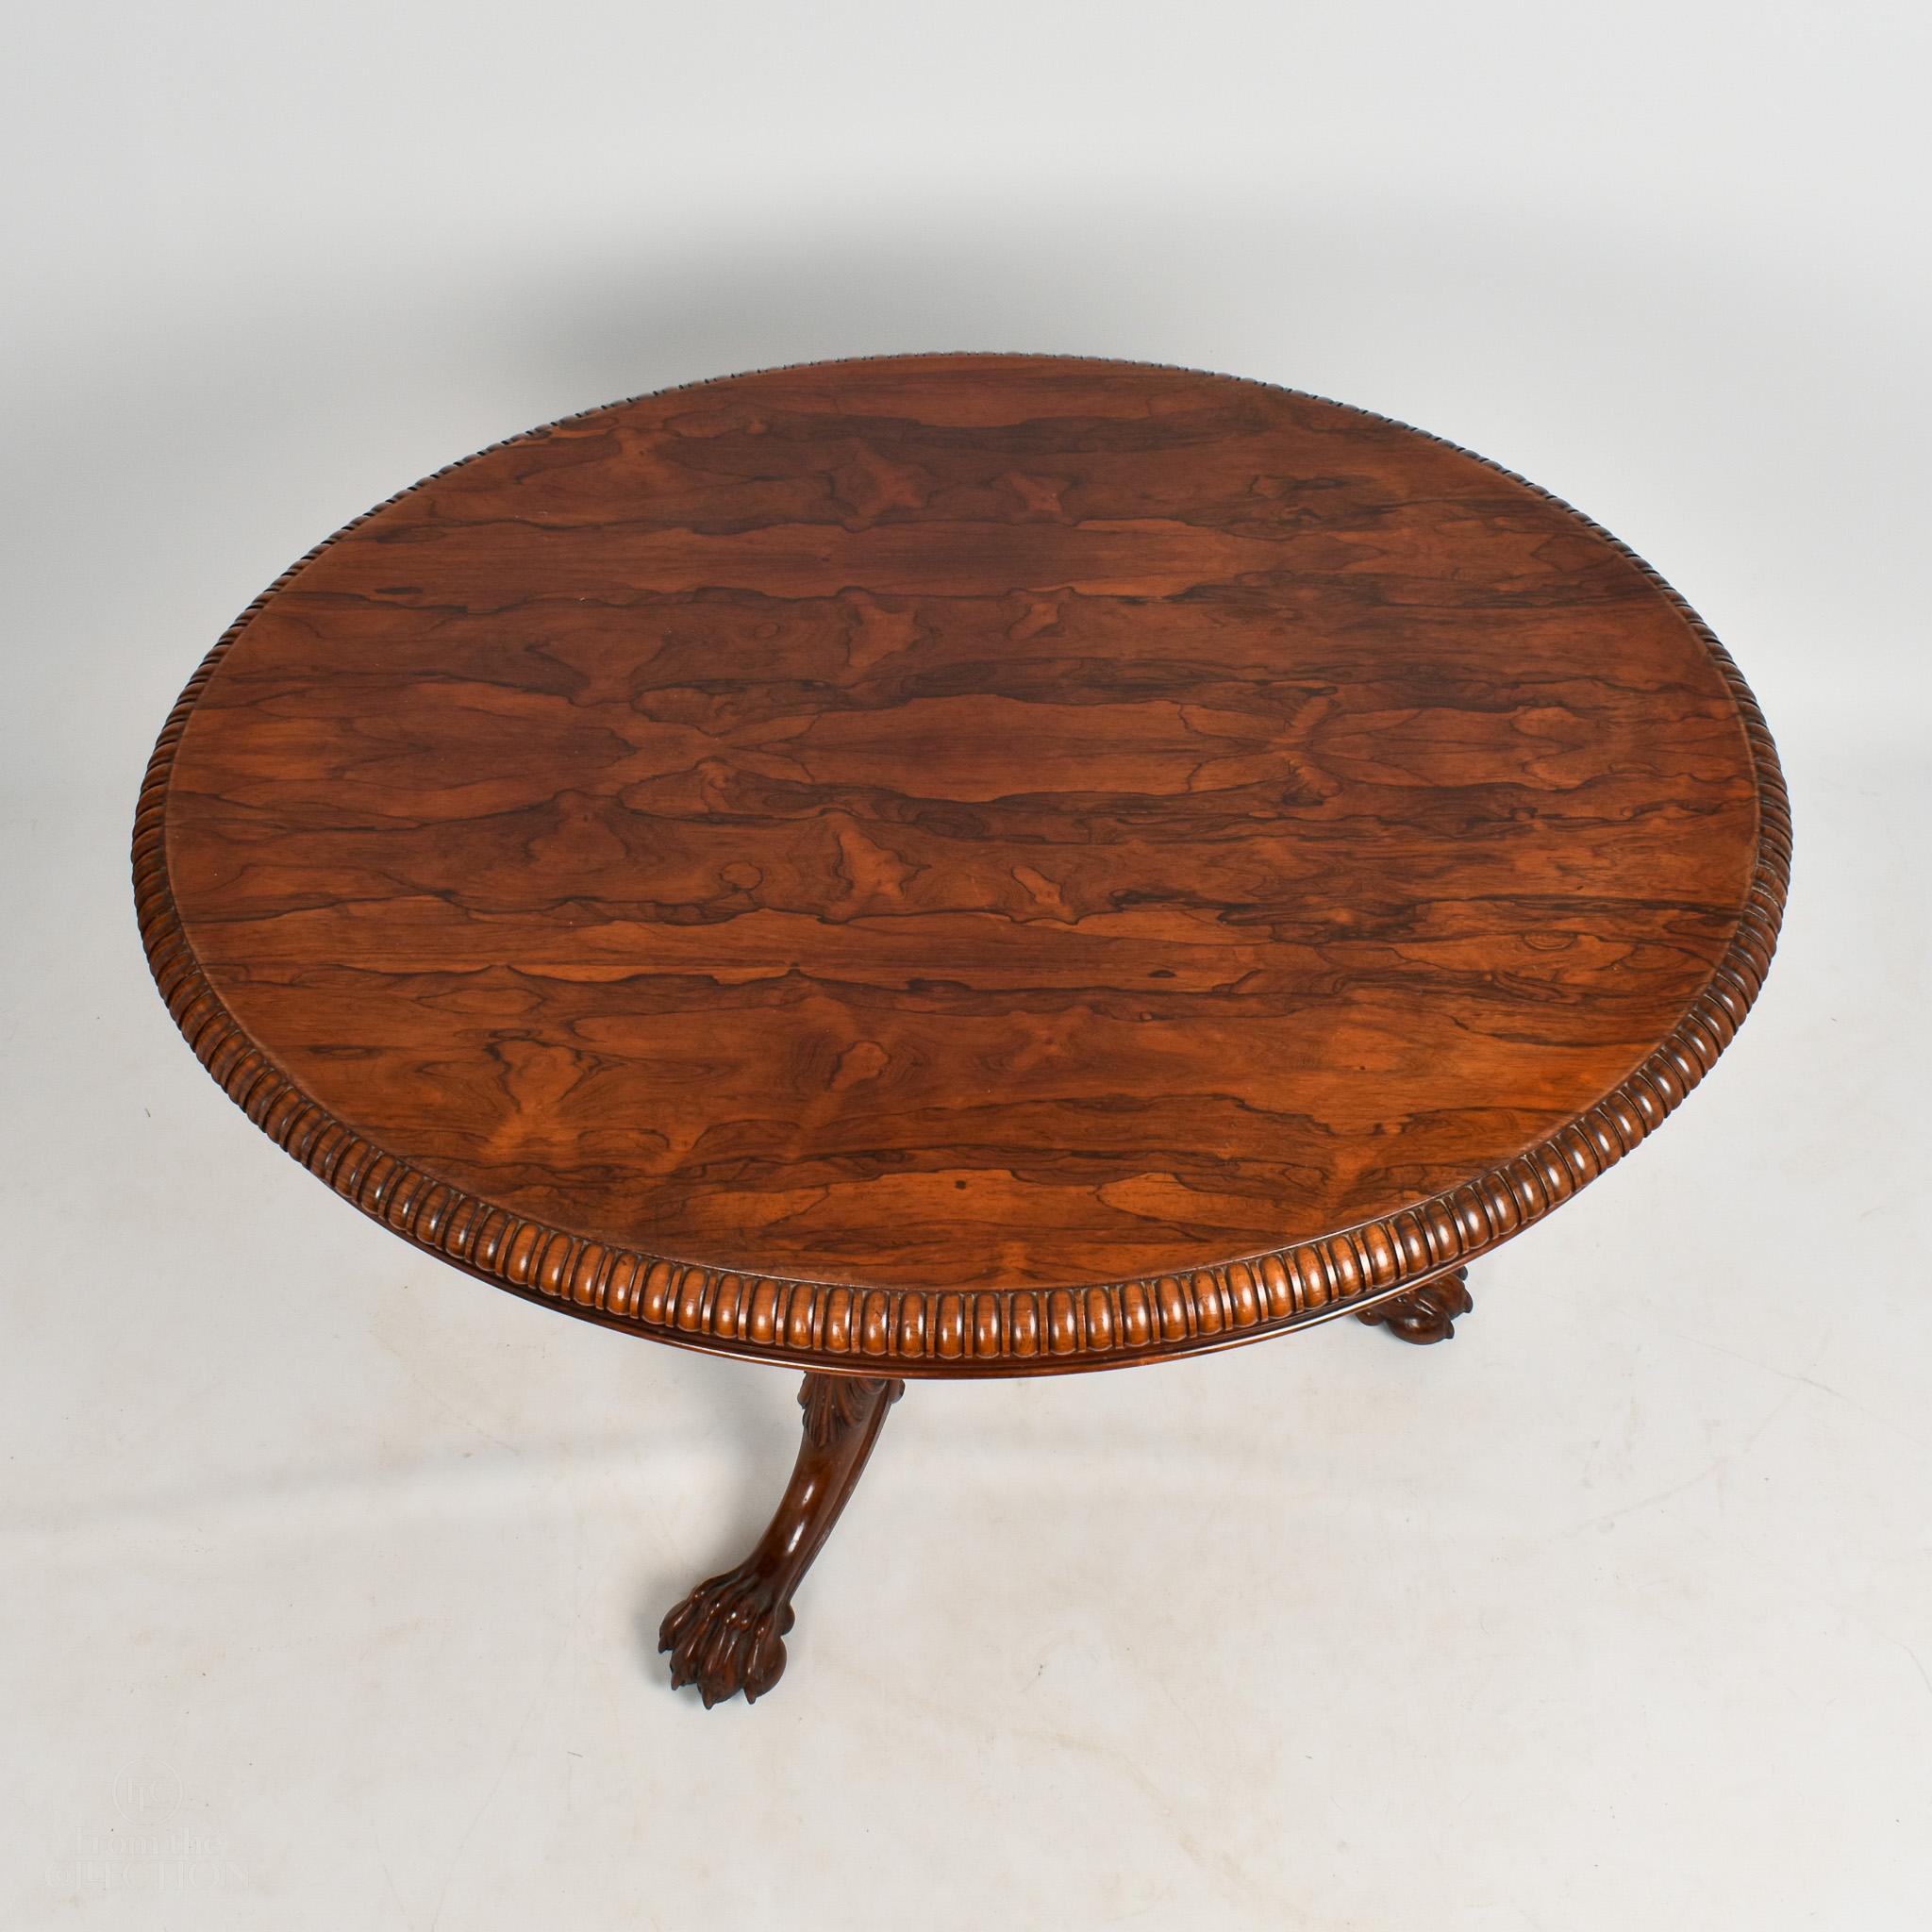 This stunning rosewood oval centre table (circa 1840) is made from a beautiful dark wood and is in excellent condition. Stamped Gillows and with beautiful carved gadrooned edging. Centre pedestal down to three splayed legs with claw feet on brass